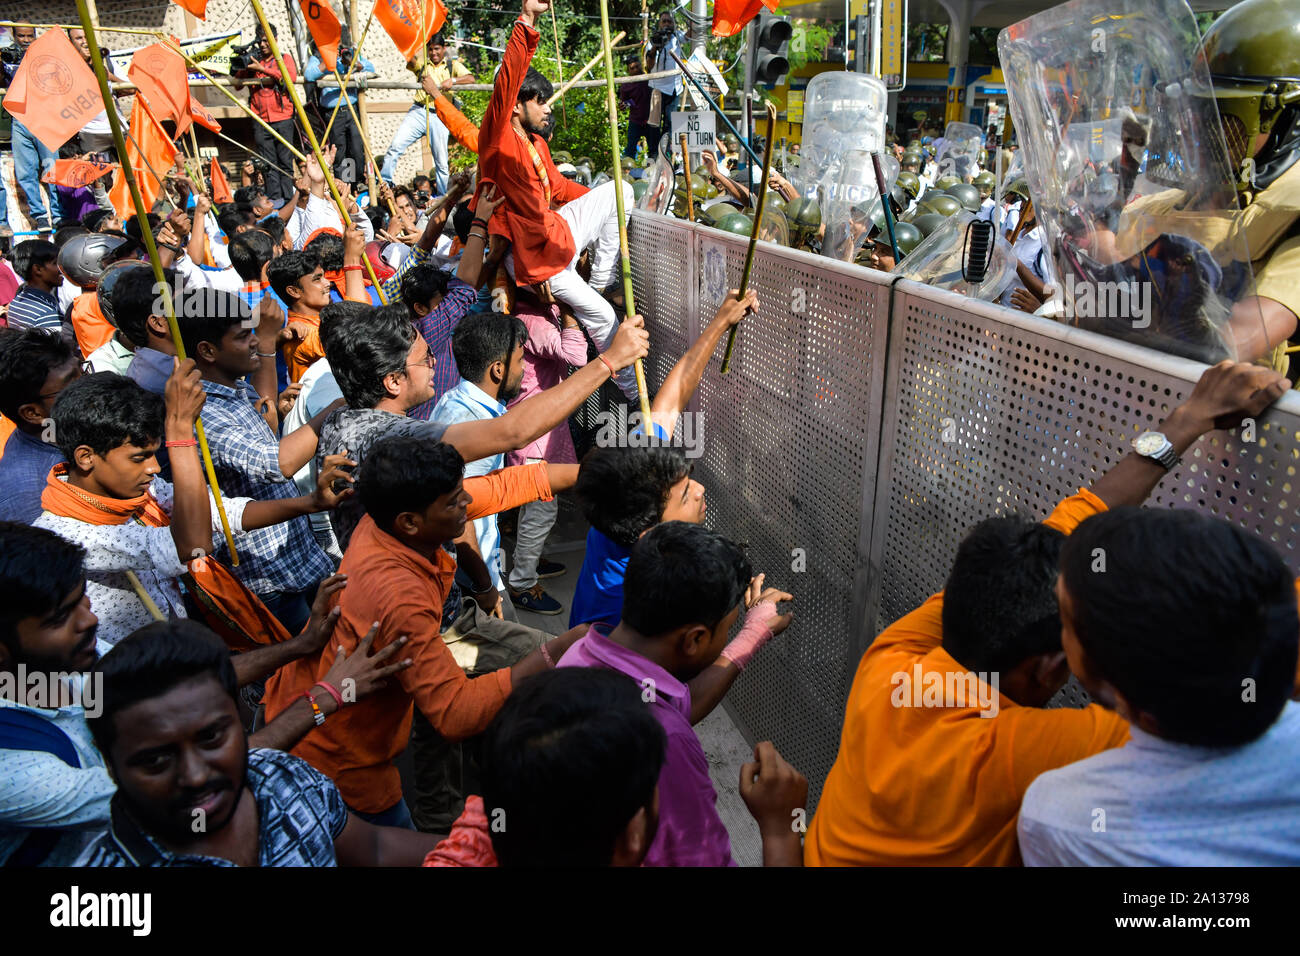 Akhil Bharatiya Vidyarthi Parishad (ABVP) activists try to push through a police barricade as police stop the ABVP's march to Jadavpur University.Akhil Bharatiya Vidyarthi Parishad (ABVP) the right wing students' organisation took out a rally to protest against the September 19 attack on the Union Minister Babul Supriyo in Jadavpur University campus. Stock Photo